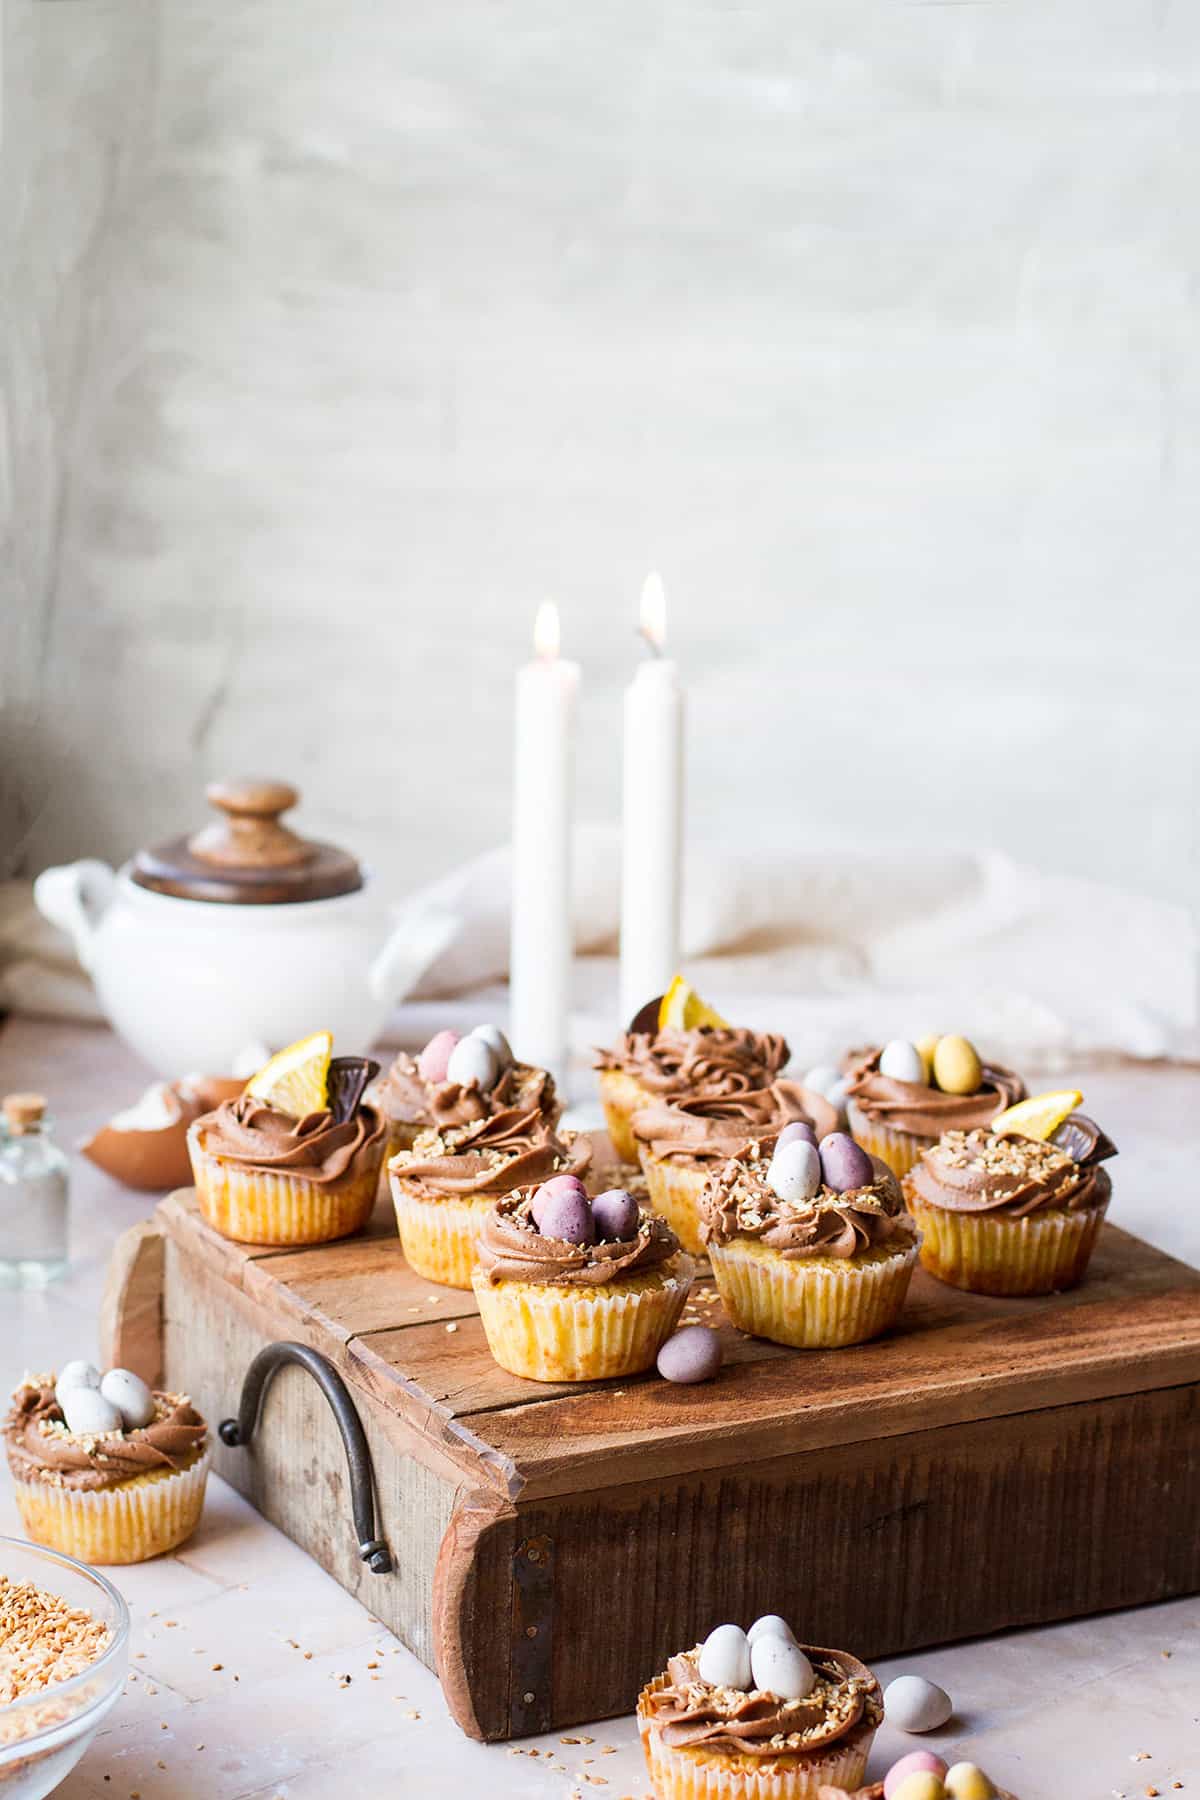 Coconut cupcakes and chocolate frosting on a wooden tray.